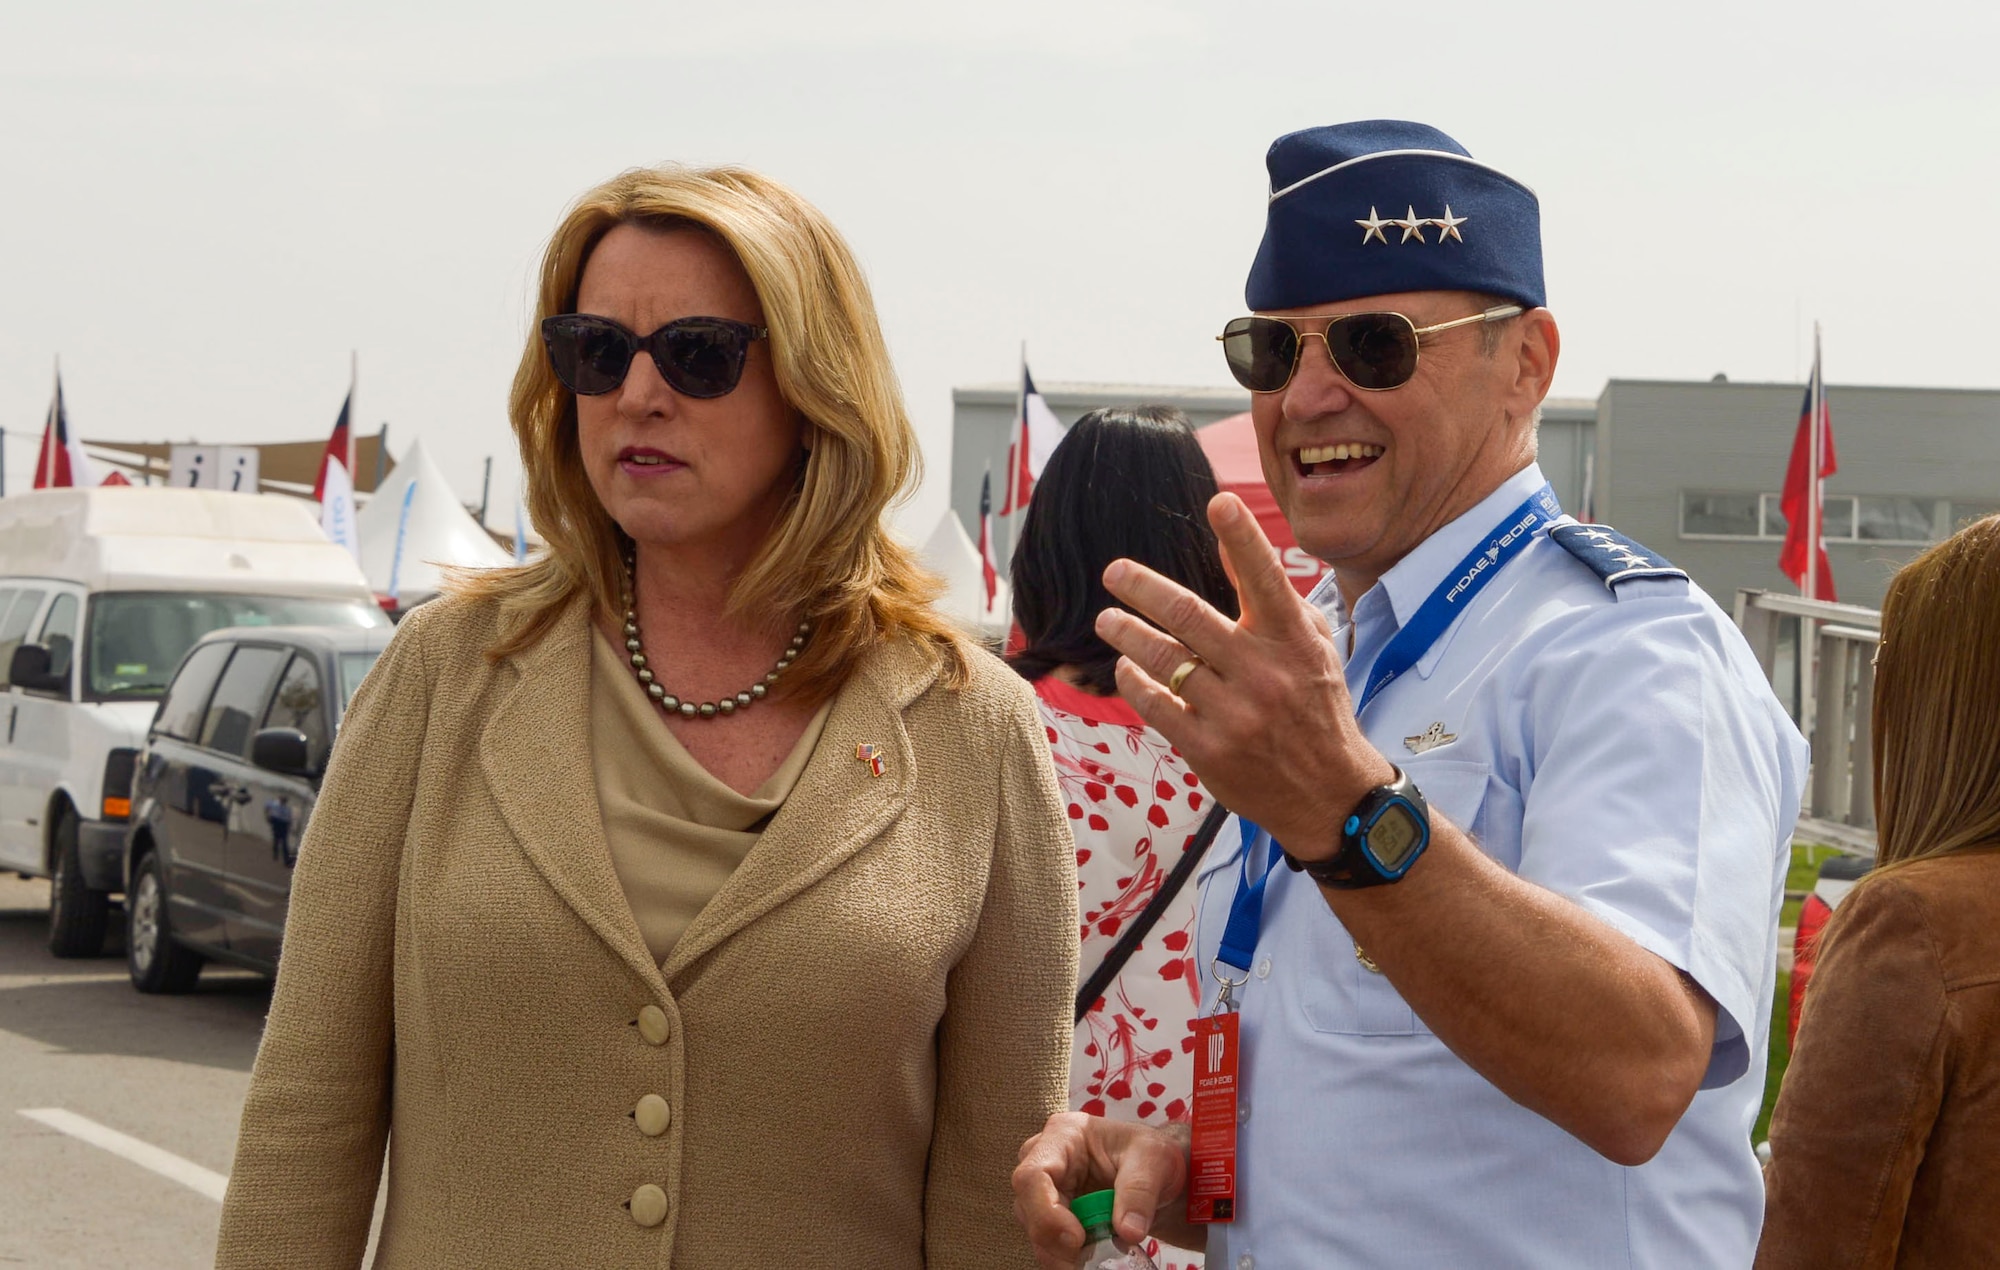 Deborah Lee James, Secretary of the Air Force, and U.S. Air Force Lt. Gen. Chris Nowland, 12th Air Force (Air Forces Southern) commander, visit the F-22 Raptor static display during the 2016 FIDAE Air and Space Trade Show in Santiago, Chile, March 29, 2016. During the FIDAE Air and Space Trade Show, U.S. Airmen participated in in several subject matter expert exchanges with their Chilean counterparts and also hosted static displays and aerial demonstrations to support the air show.  (U.S. Air Force photo by Tech. Sgt. Heather Redman/Released)